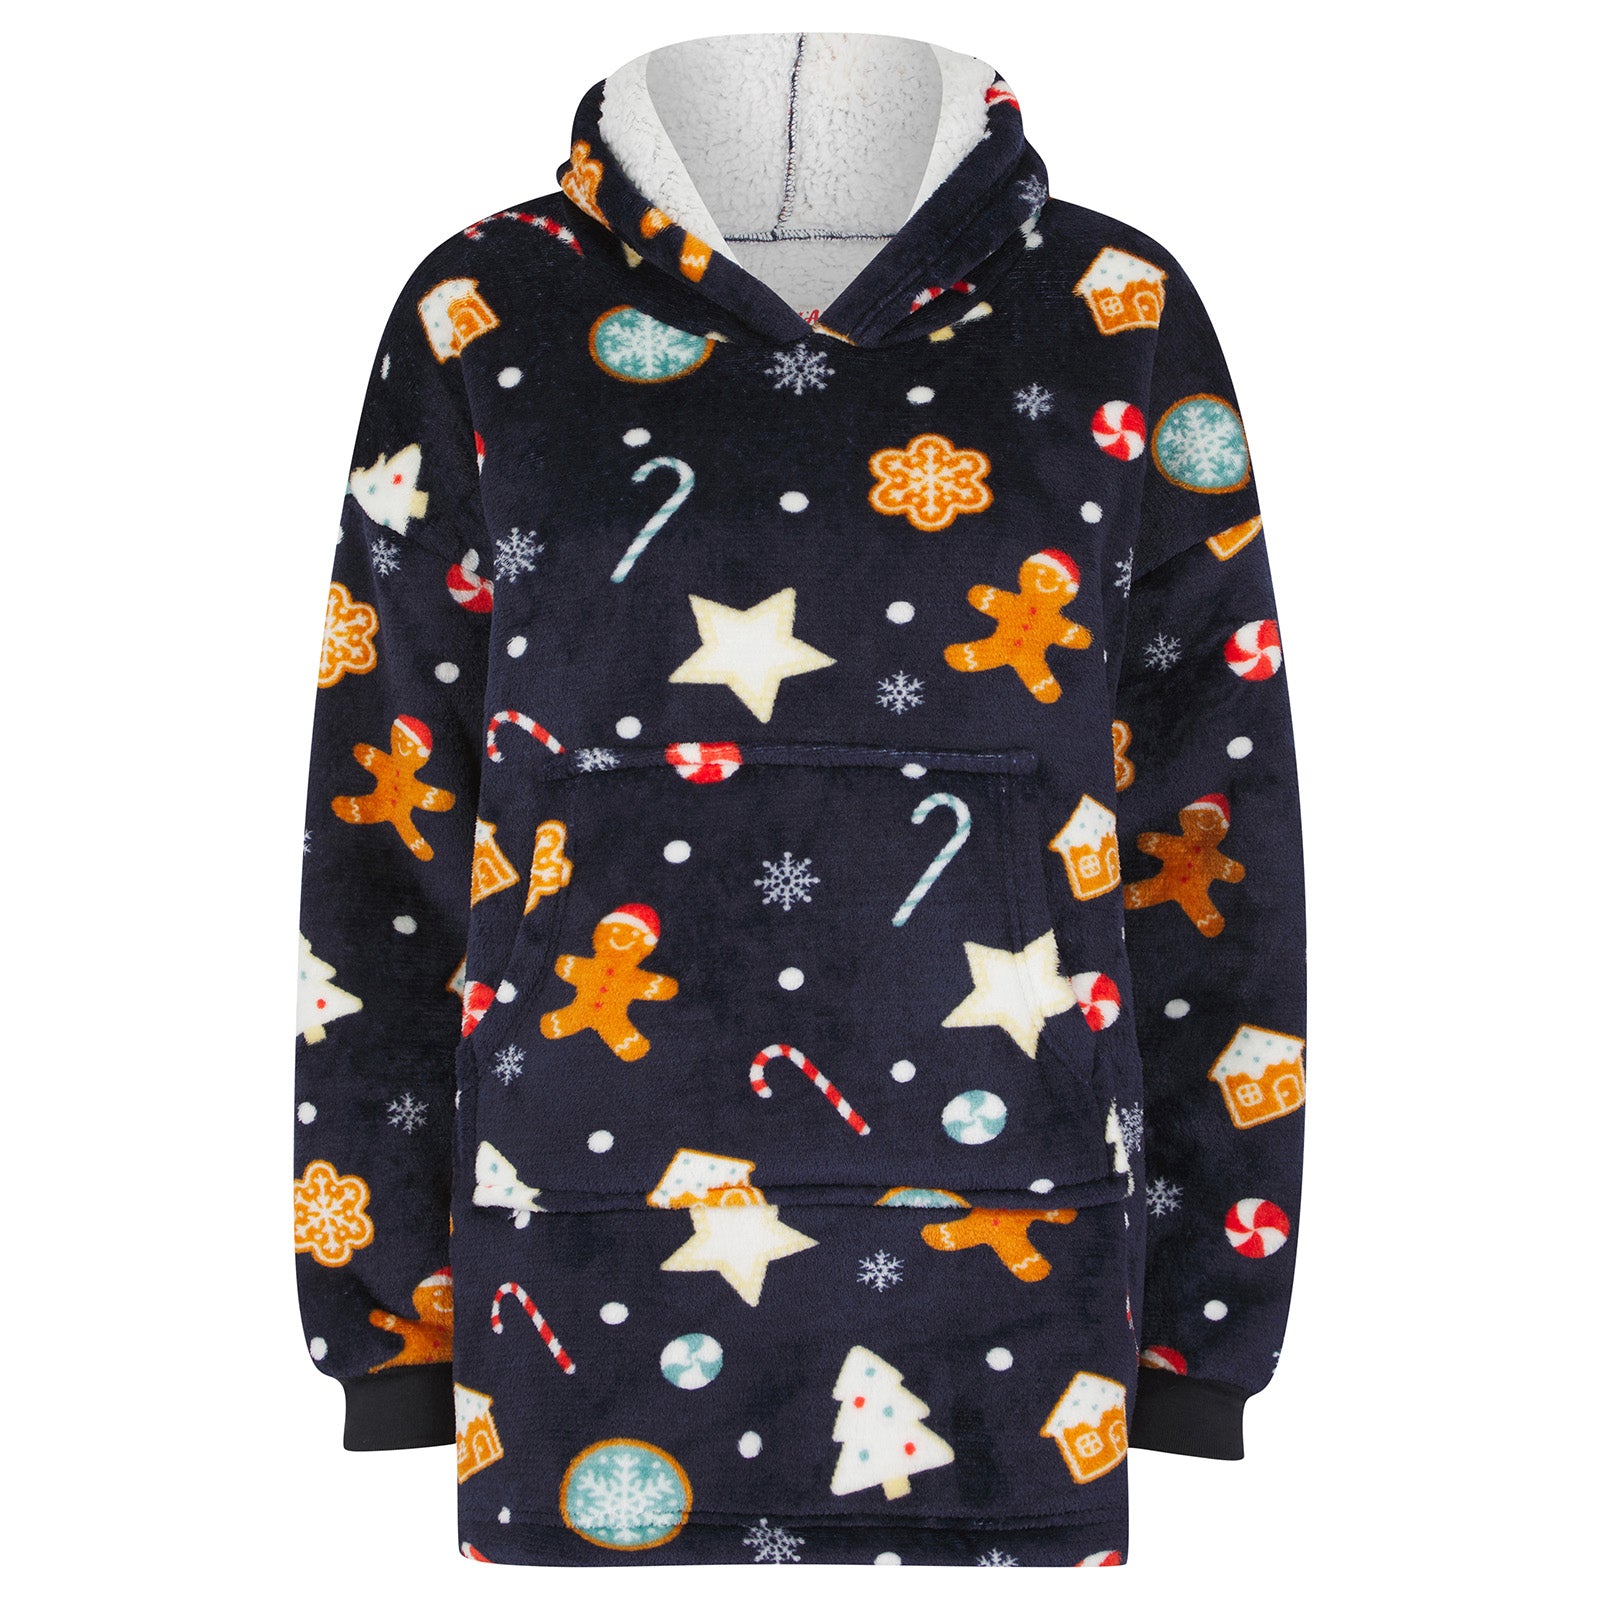 navy blue oversized hoodie featuring gingerbread, star and candy cane all over pattern with think fleece lining